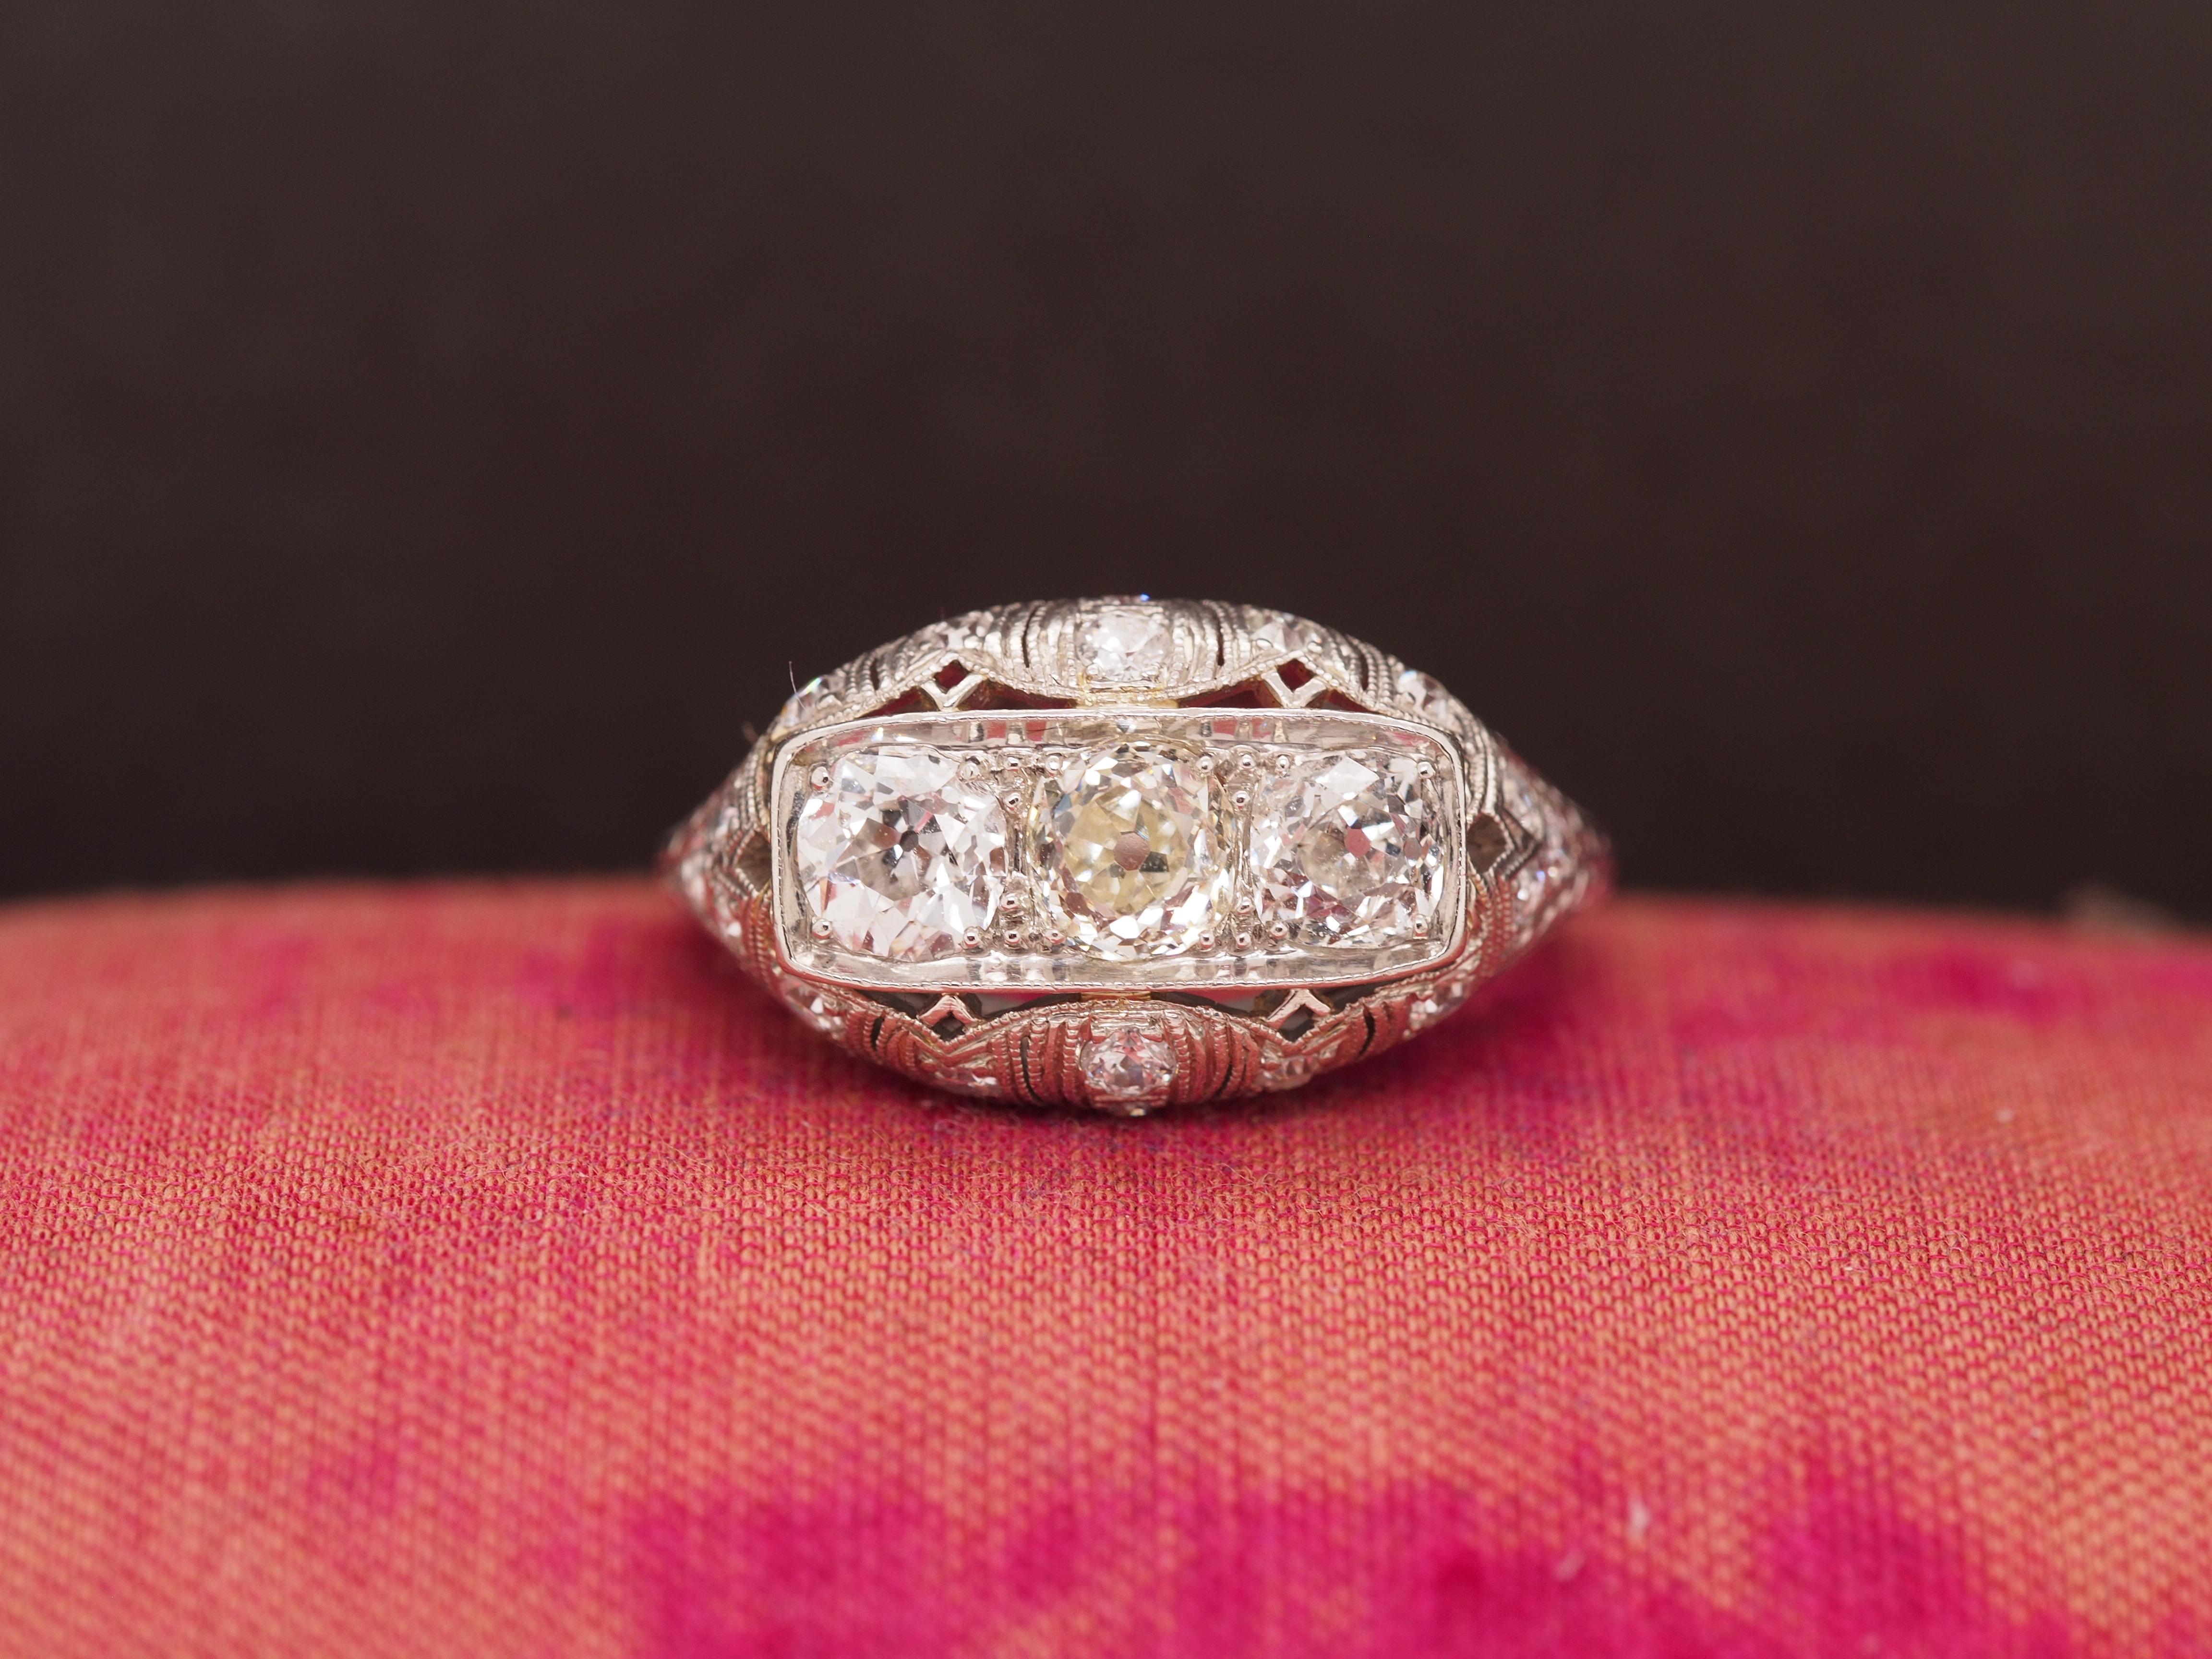 Year: 1930s
Item Details:
Ring Size: 6.25
Metal Type: Platinum [Hallmarked, and Tested]
Weight: 5.5 grams
Diamond Details: .40ct each x 3 Center Diamonds = 1.20ct, total. H/I color, VS clarity, Old mine brilliant
Side Stone Details: .20cttw, old